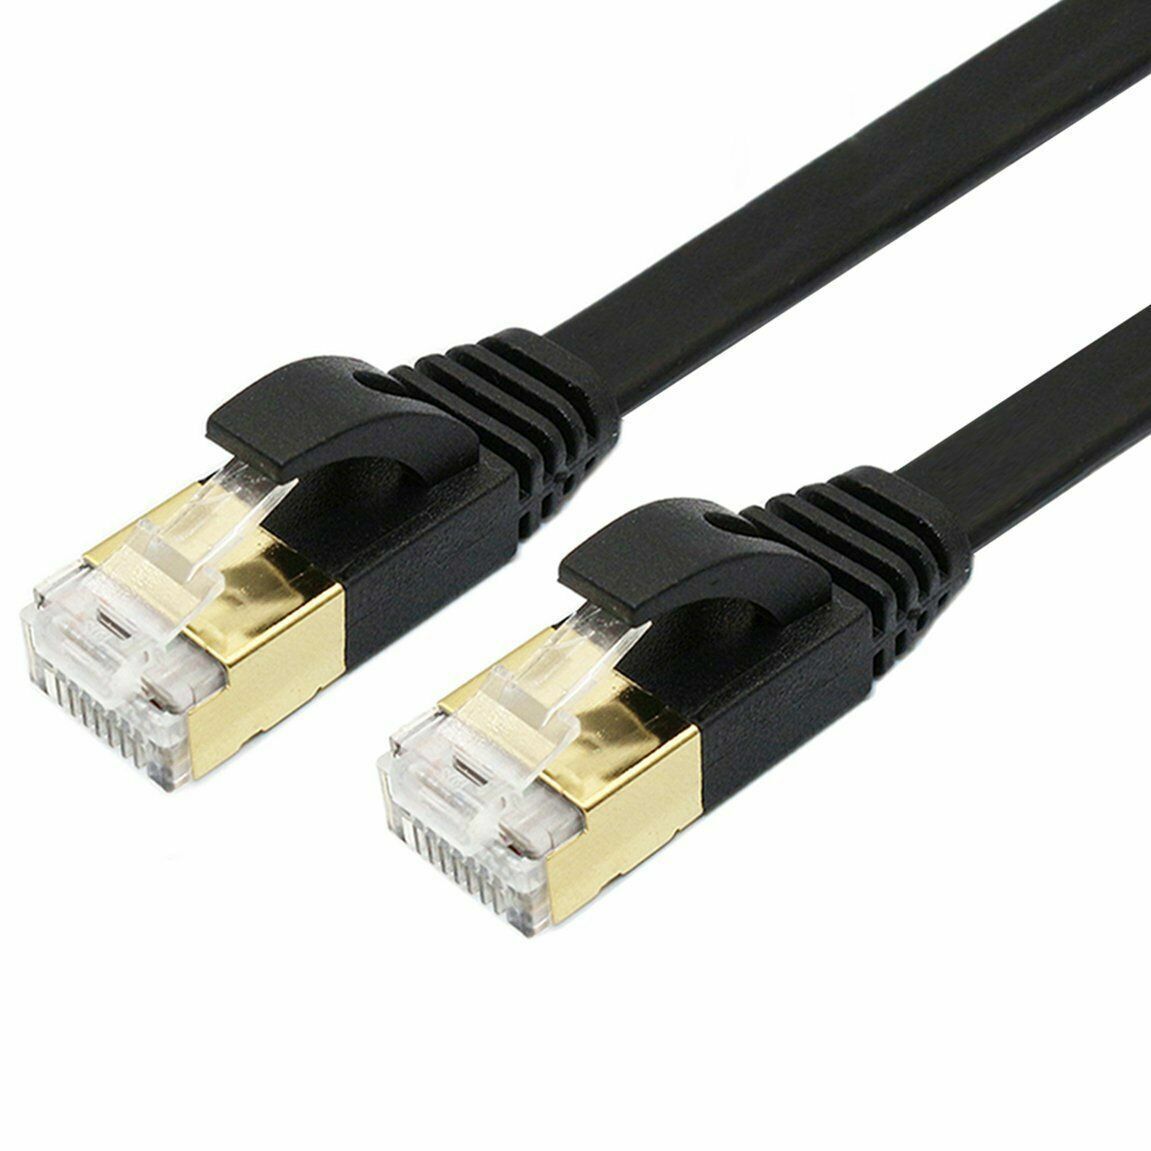 50FT CAT7 CAT 7 Flat Ethernet Cable LAN RJ45 Internet Router Patch Cord 50 Feet